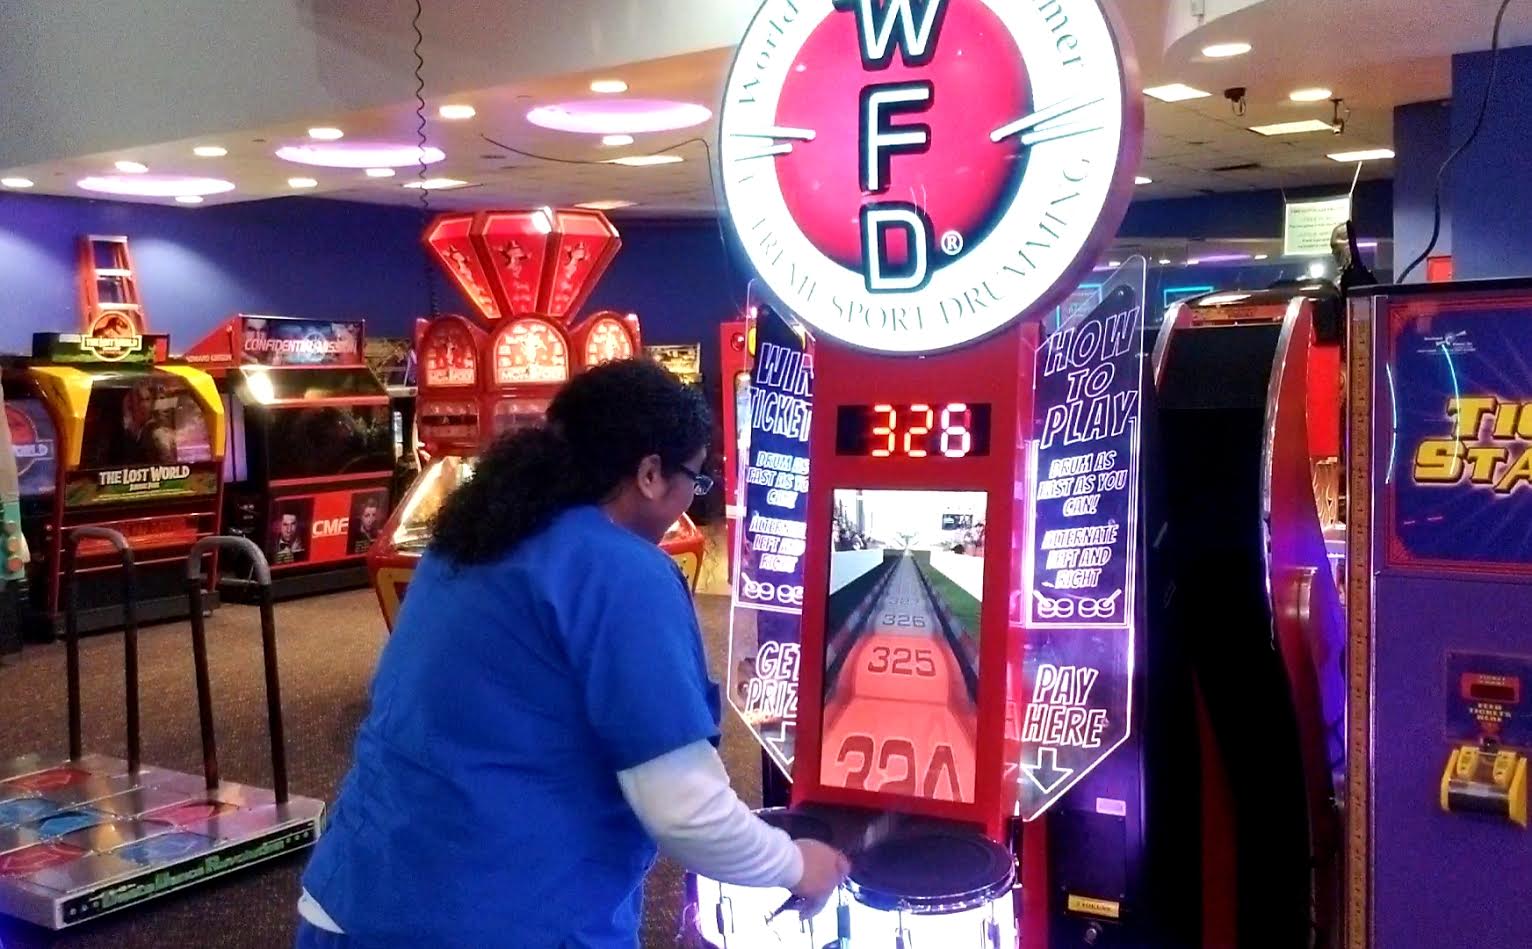 WFD the Arcade Game at the IAPPA